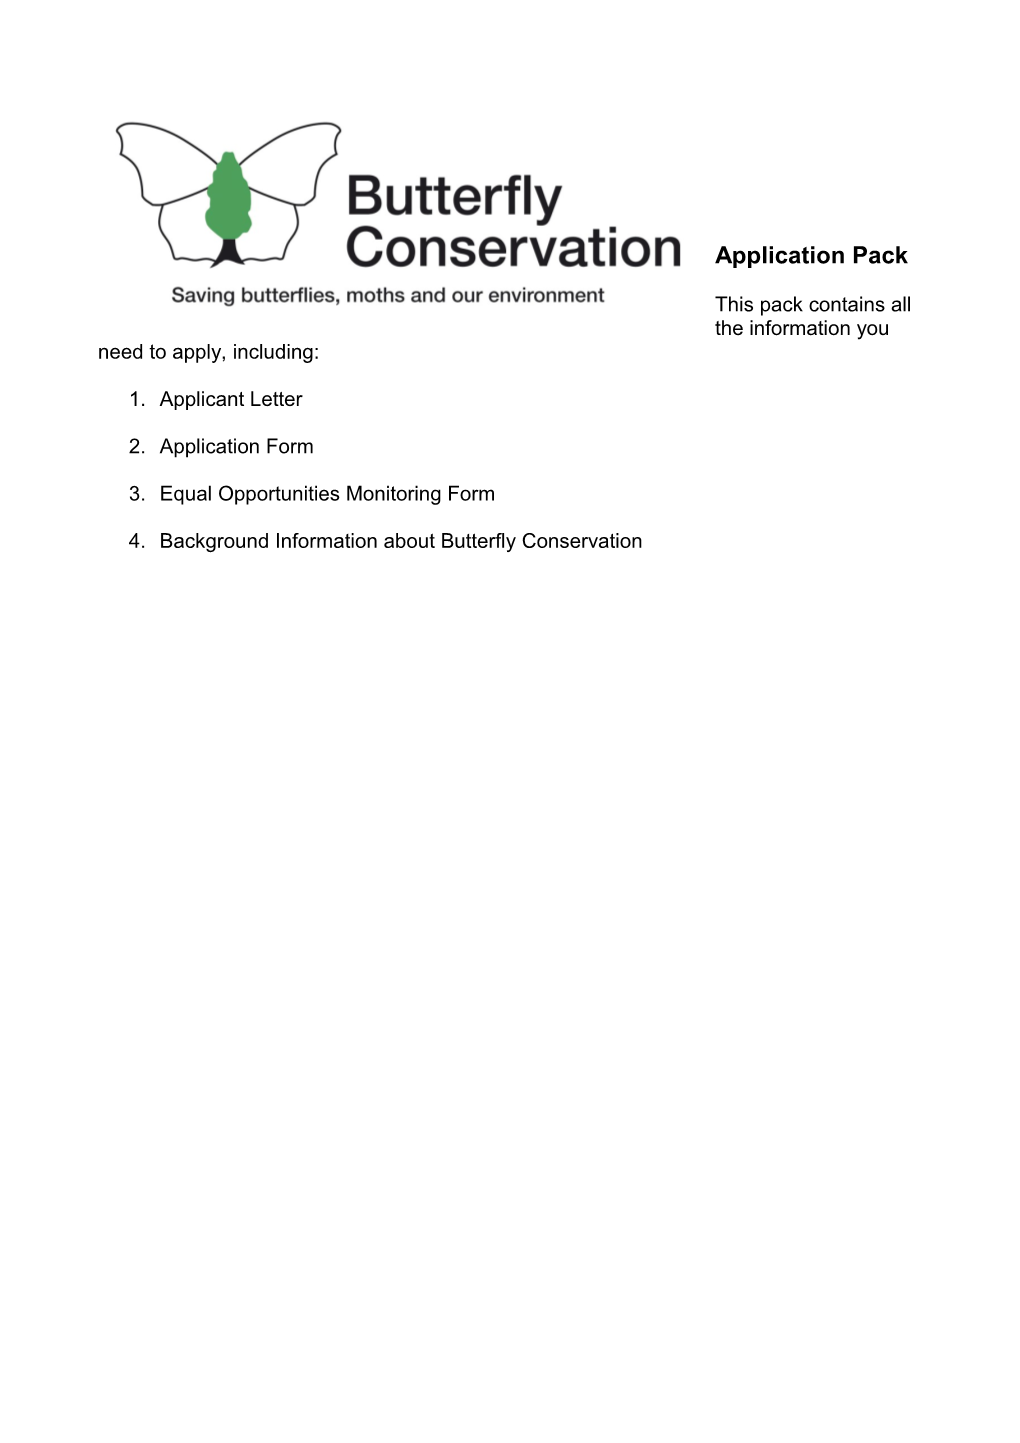 Butterfly Conservation Will Seek to Ensure That All Existing and Potential Employees Are